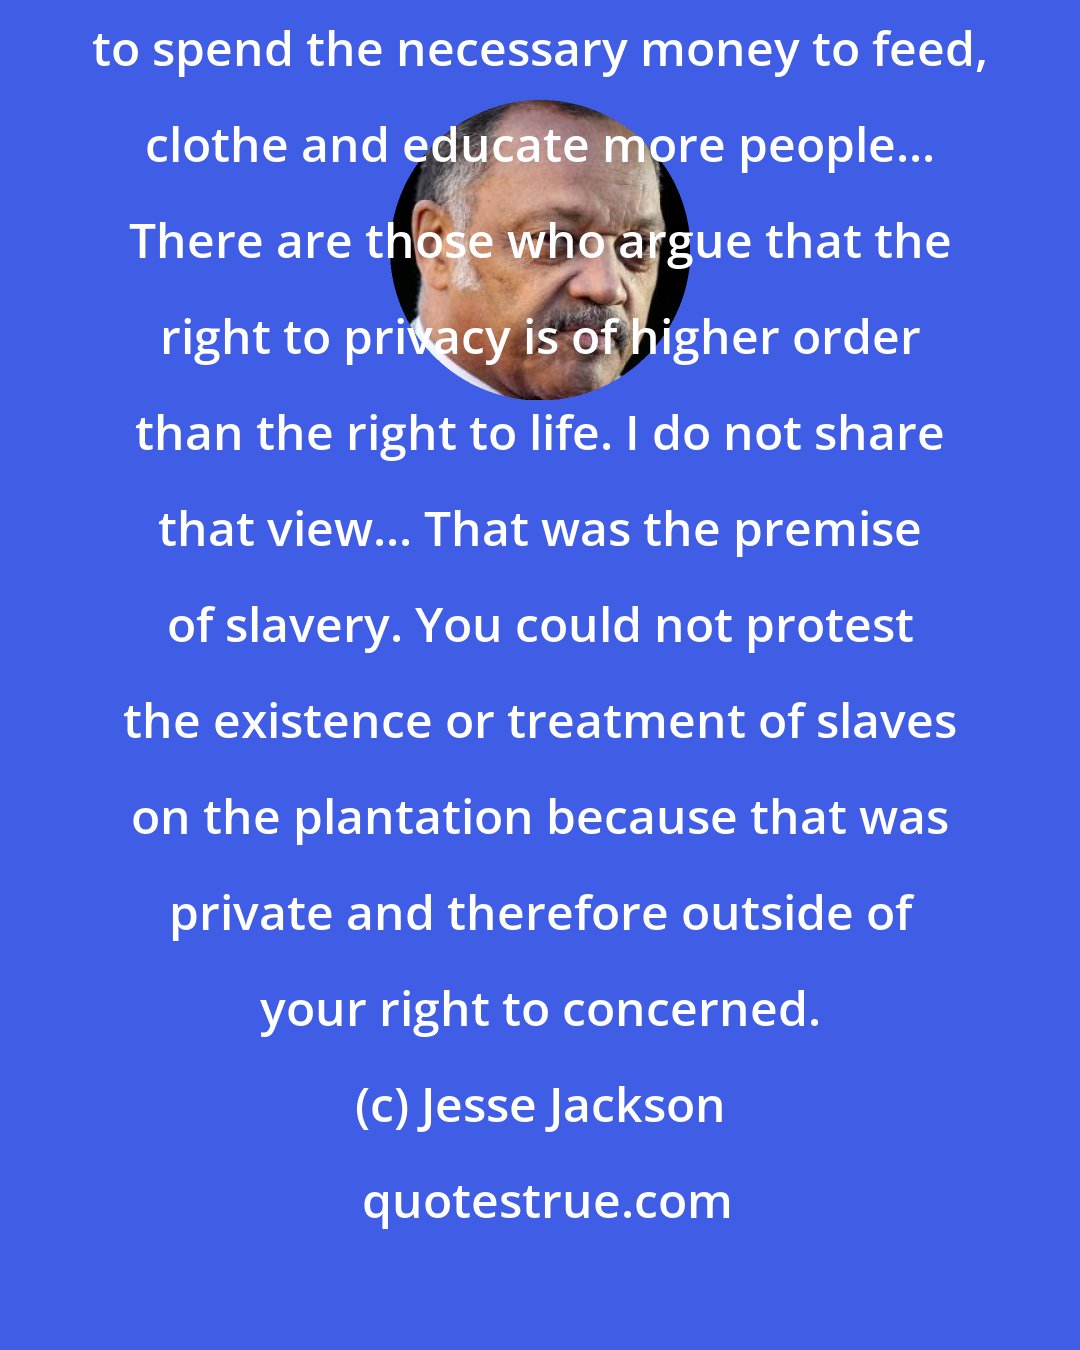 Jesse Jackson: Politicians argue for abortion largely because they do not want to spend the necessary money to feed, clothe and educate more people... There are those who argue that the right to privacy is of higher order than the right to life. I do not share that view... That was the premise of slavery. You could not protest the existence or treatment of slaves on the plantation because that was private and therefore outside of your right to concerned.